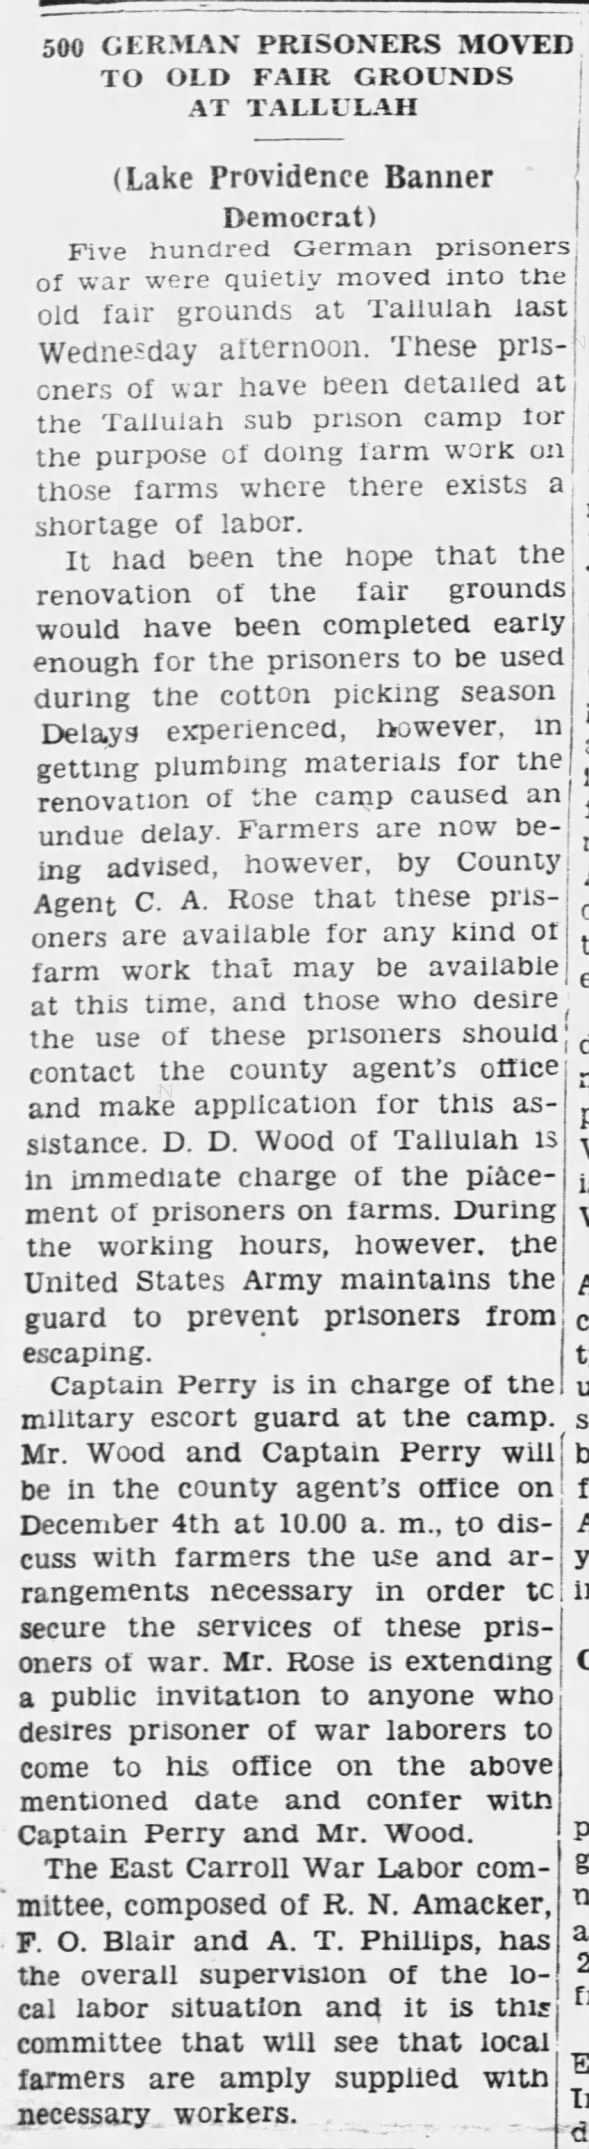 500 German Prisoners Moved to Old Fair Grounds at Tallulah